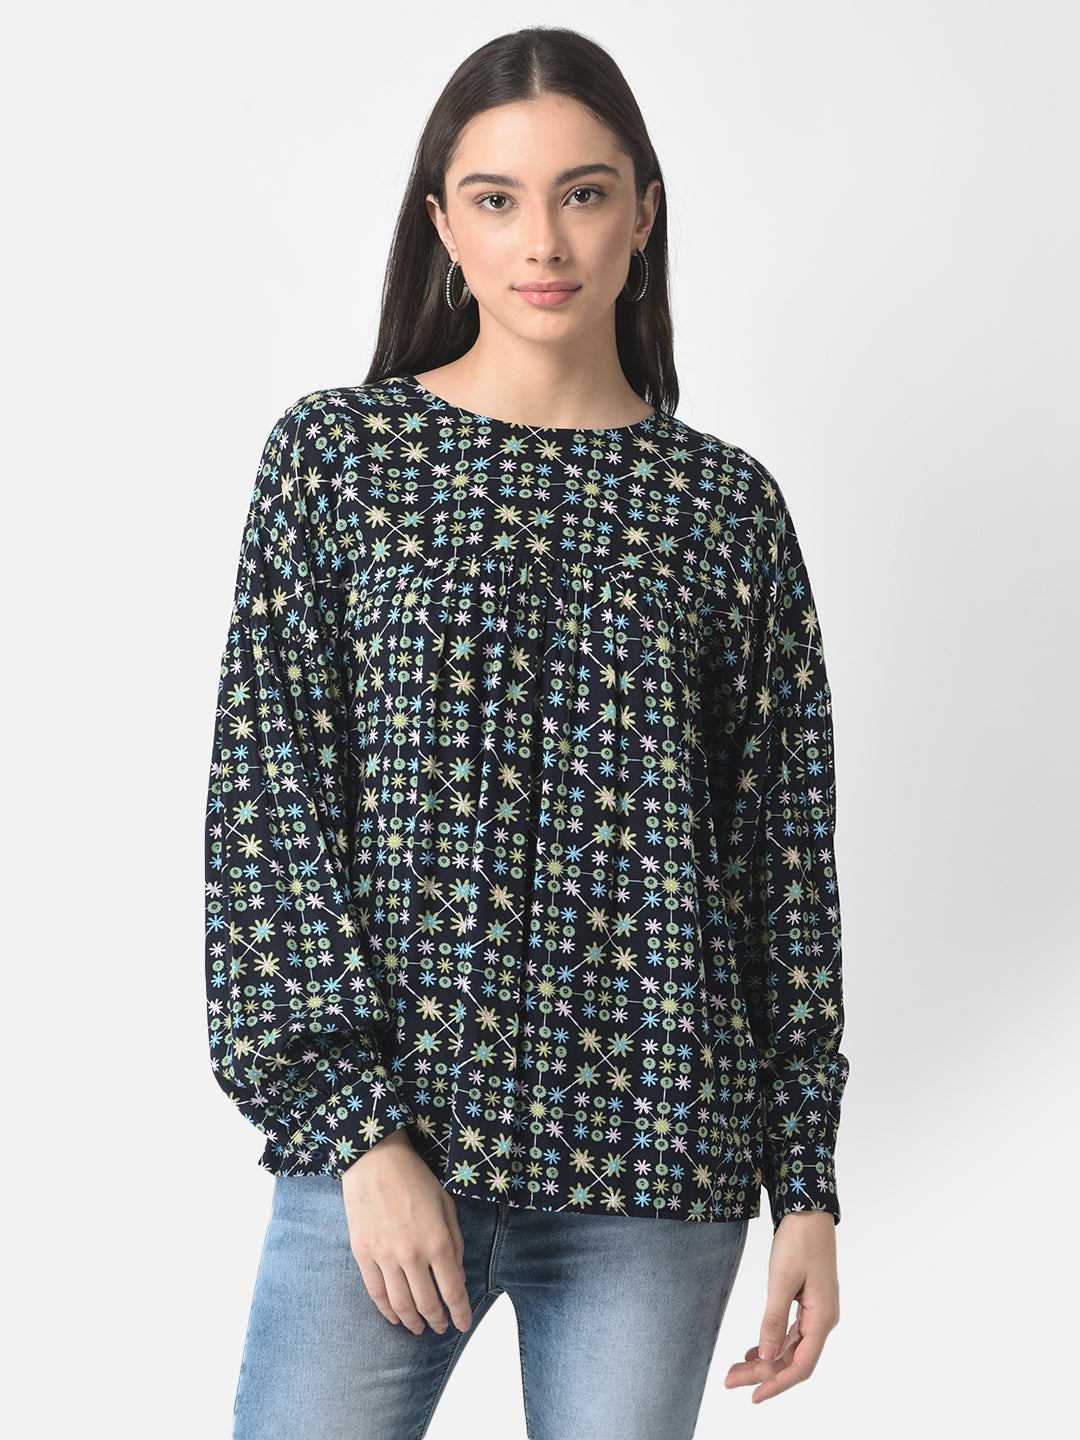  Navy Blue Abstract Print Top